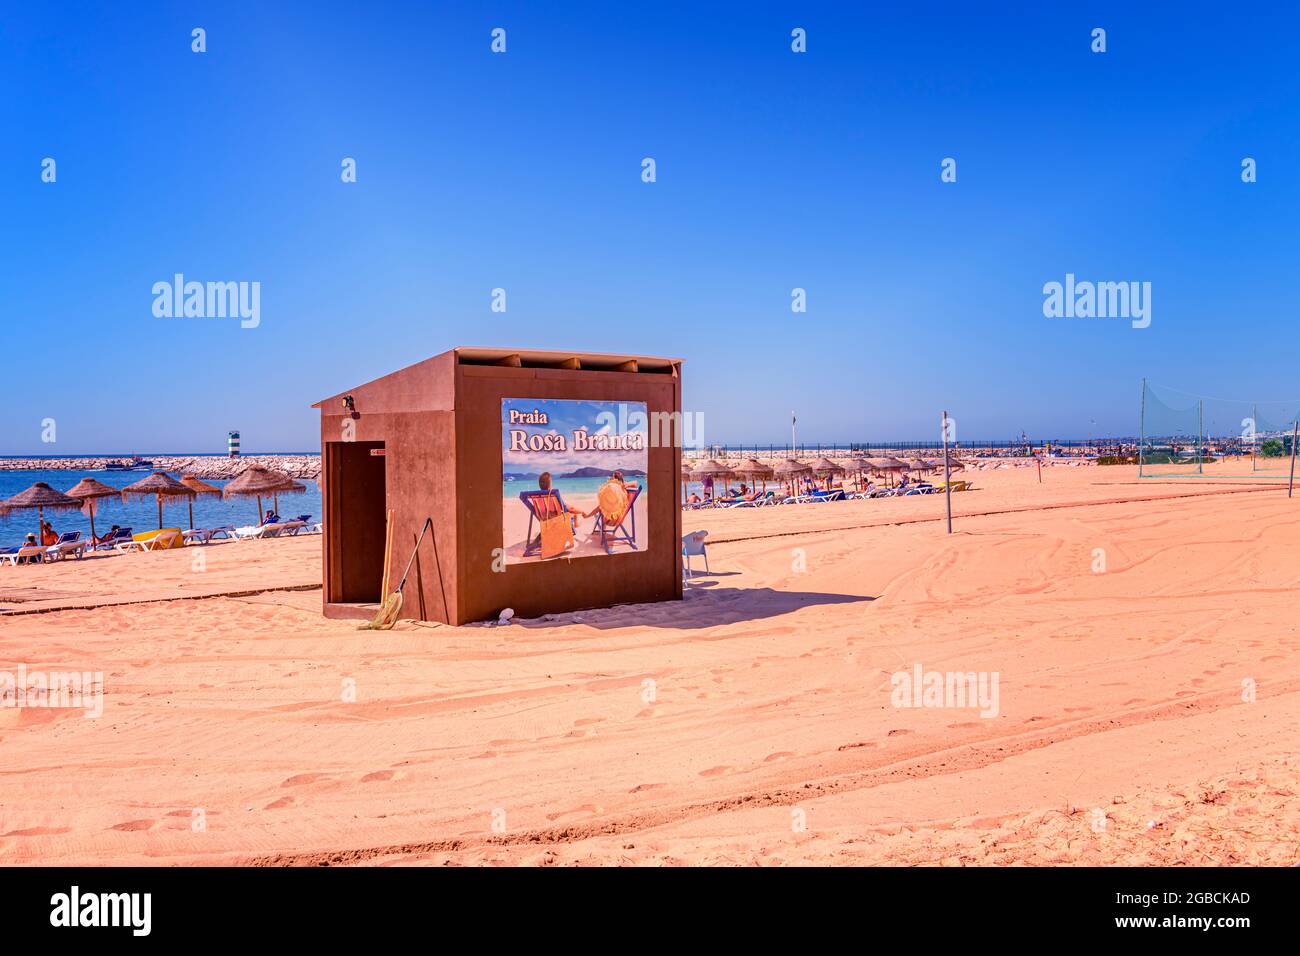 Praia Do Rosa High Resolution Stock Photography and Images - Alamy